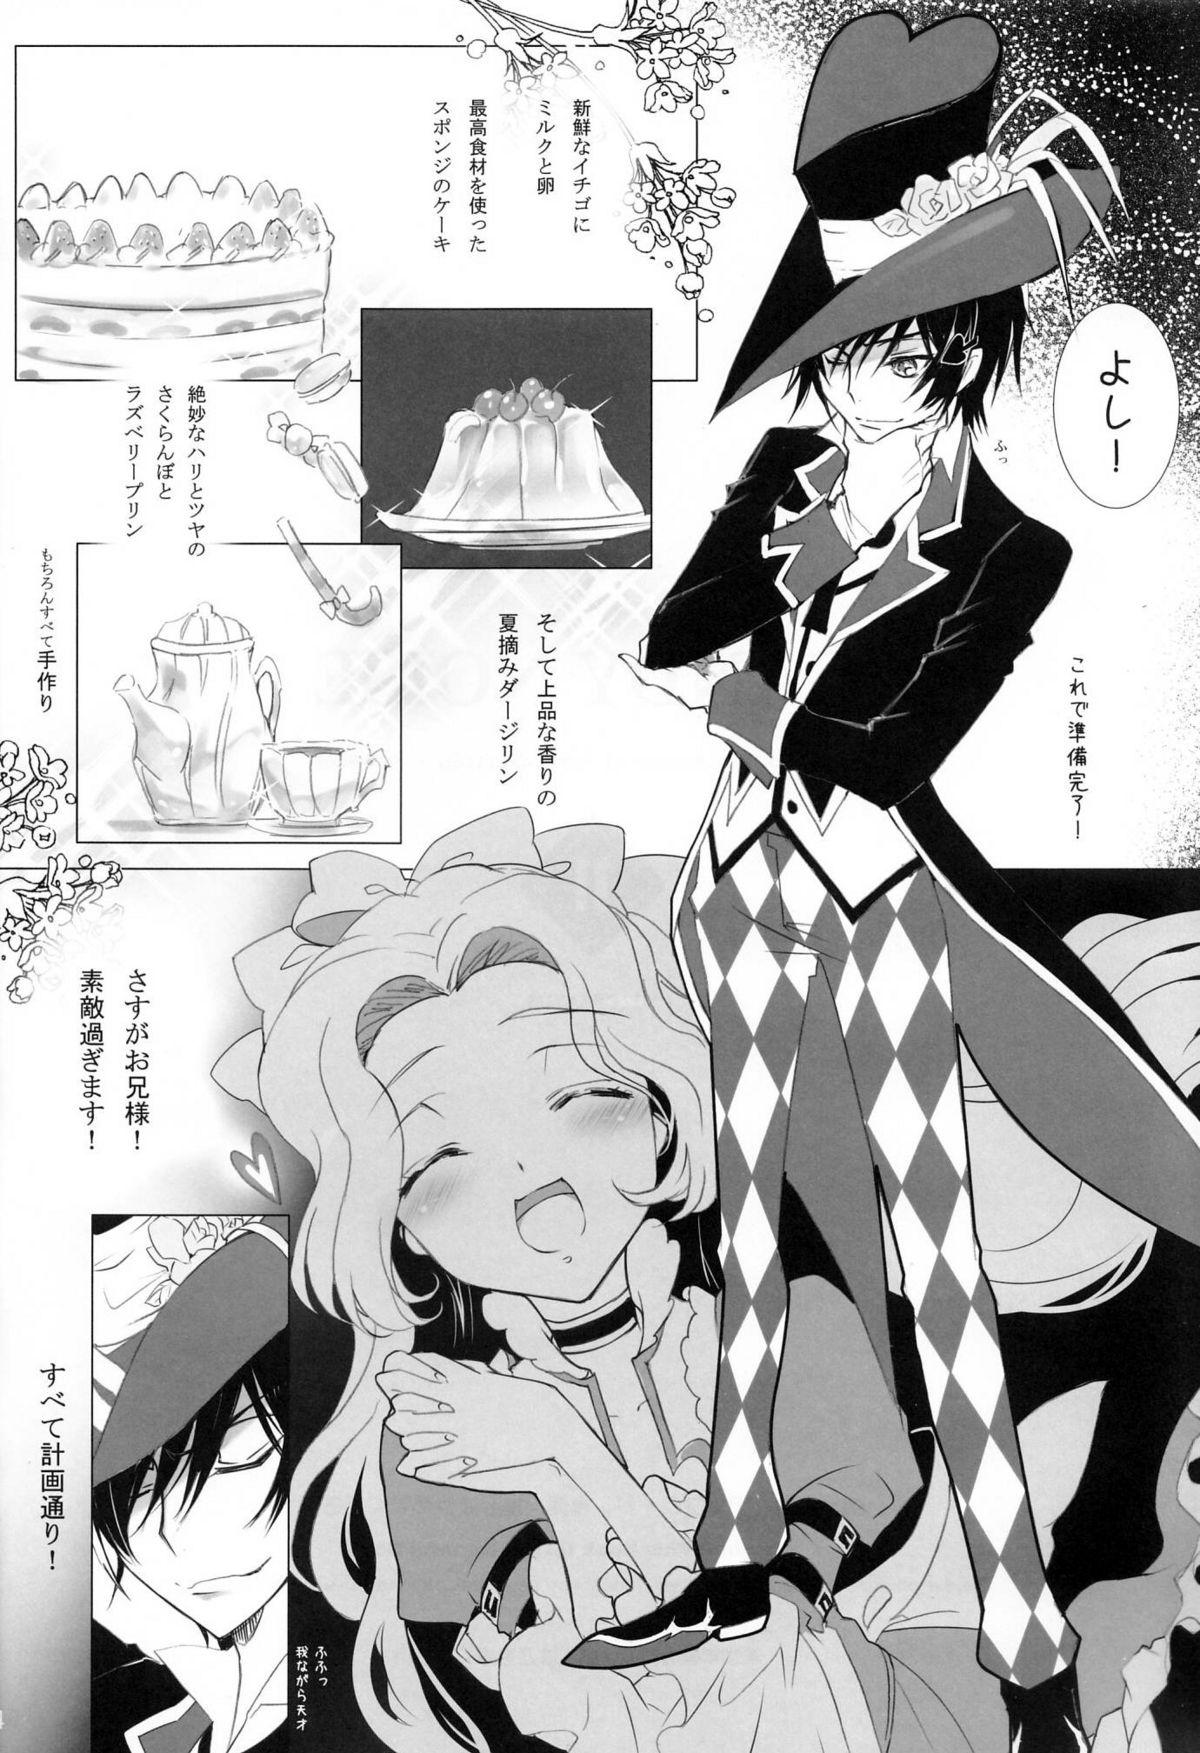 Livecam CANDY NOISE - Code geass Tribute - Page 6